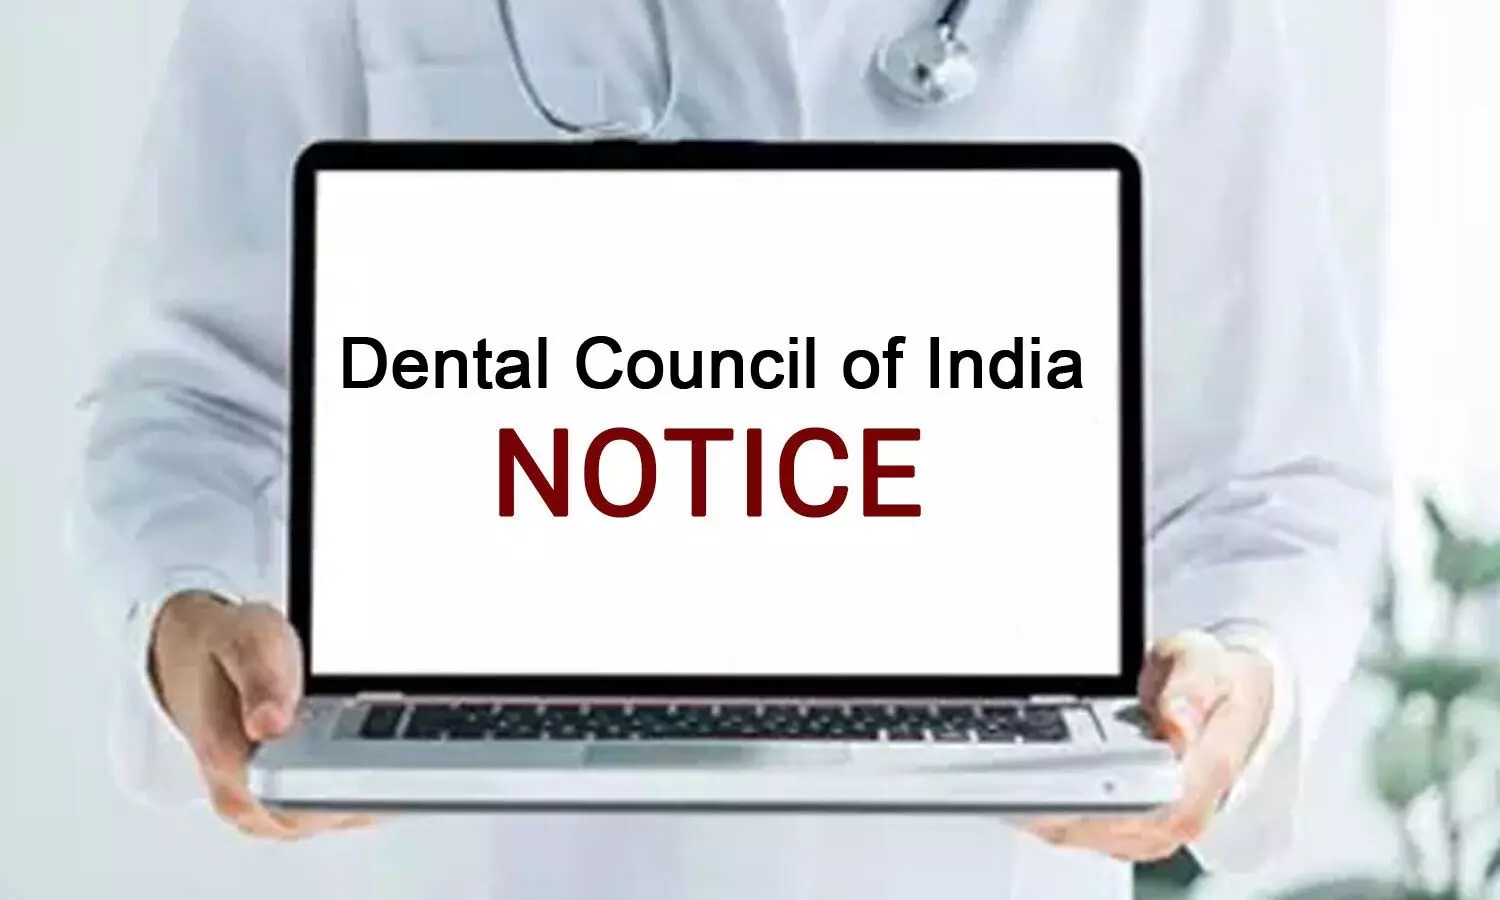 DCI directs all dental colleges to Furnish BDS degree details of MDS students before 31st March